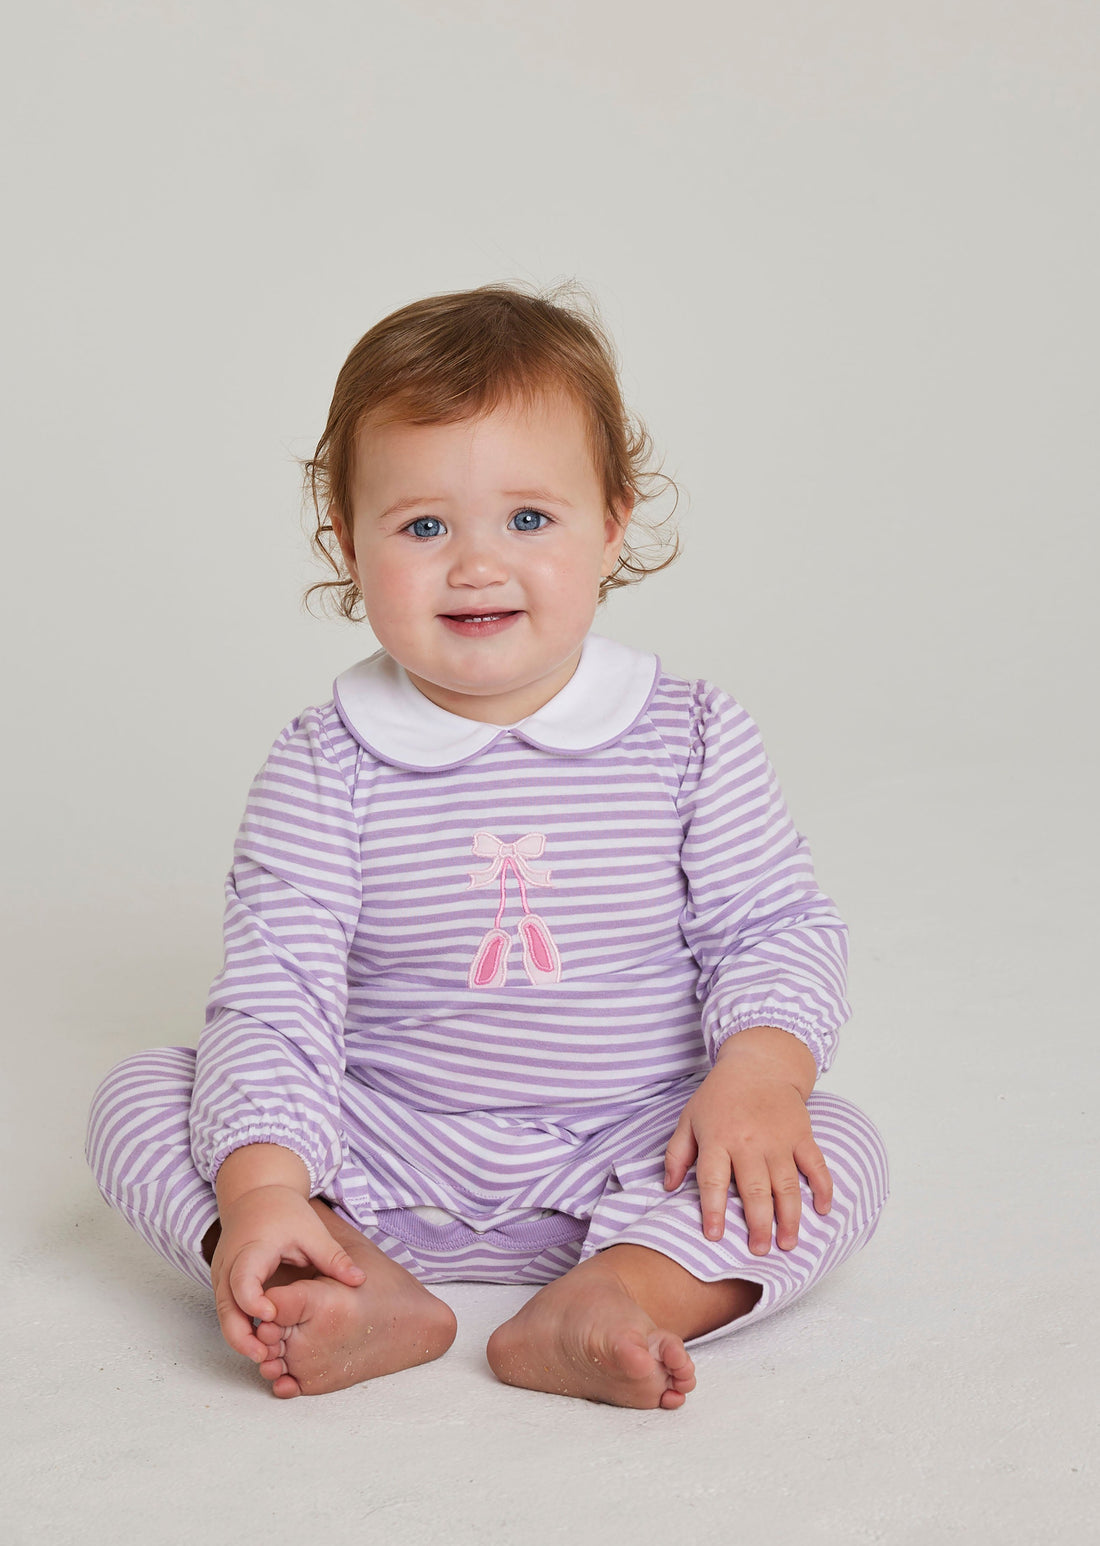 Little English baby girl classic lavender and white striped knit romper with applique ballet slippers on chest 